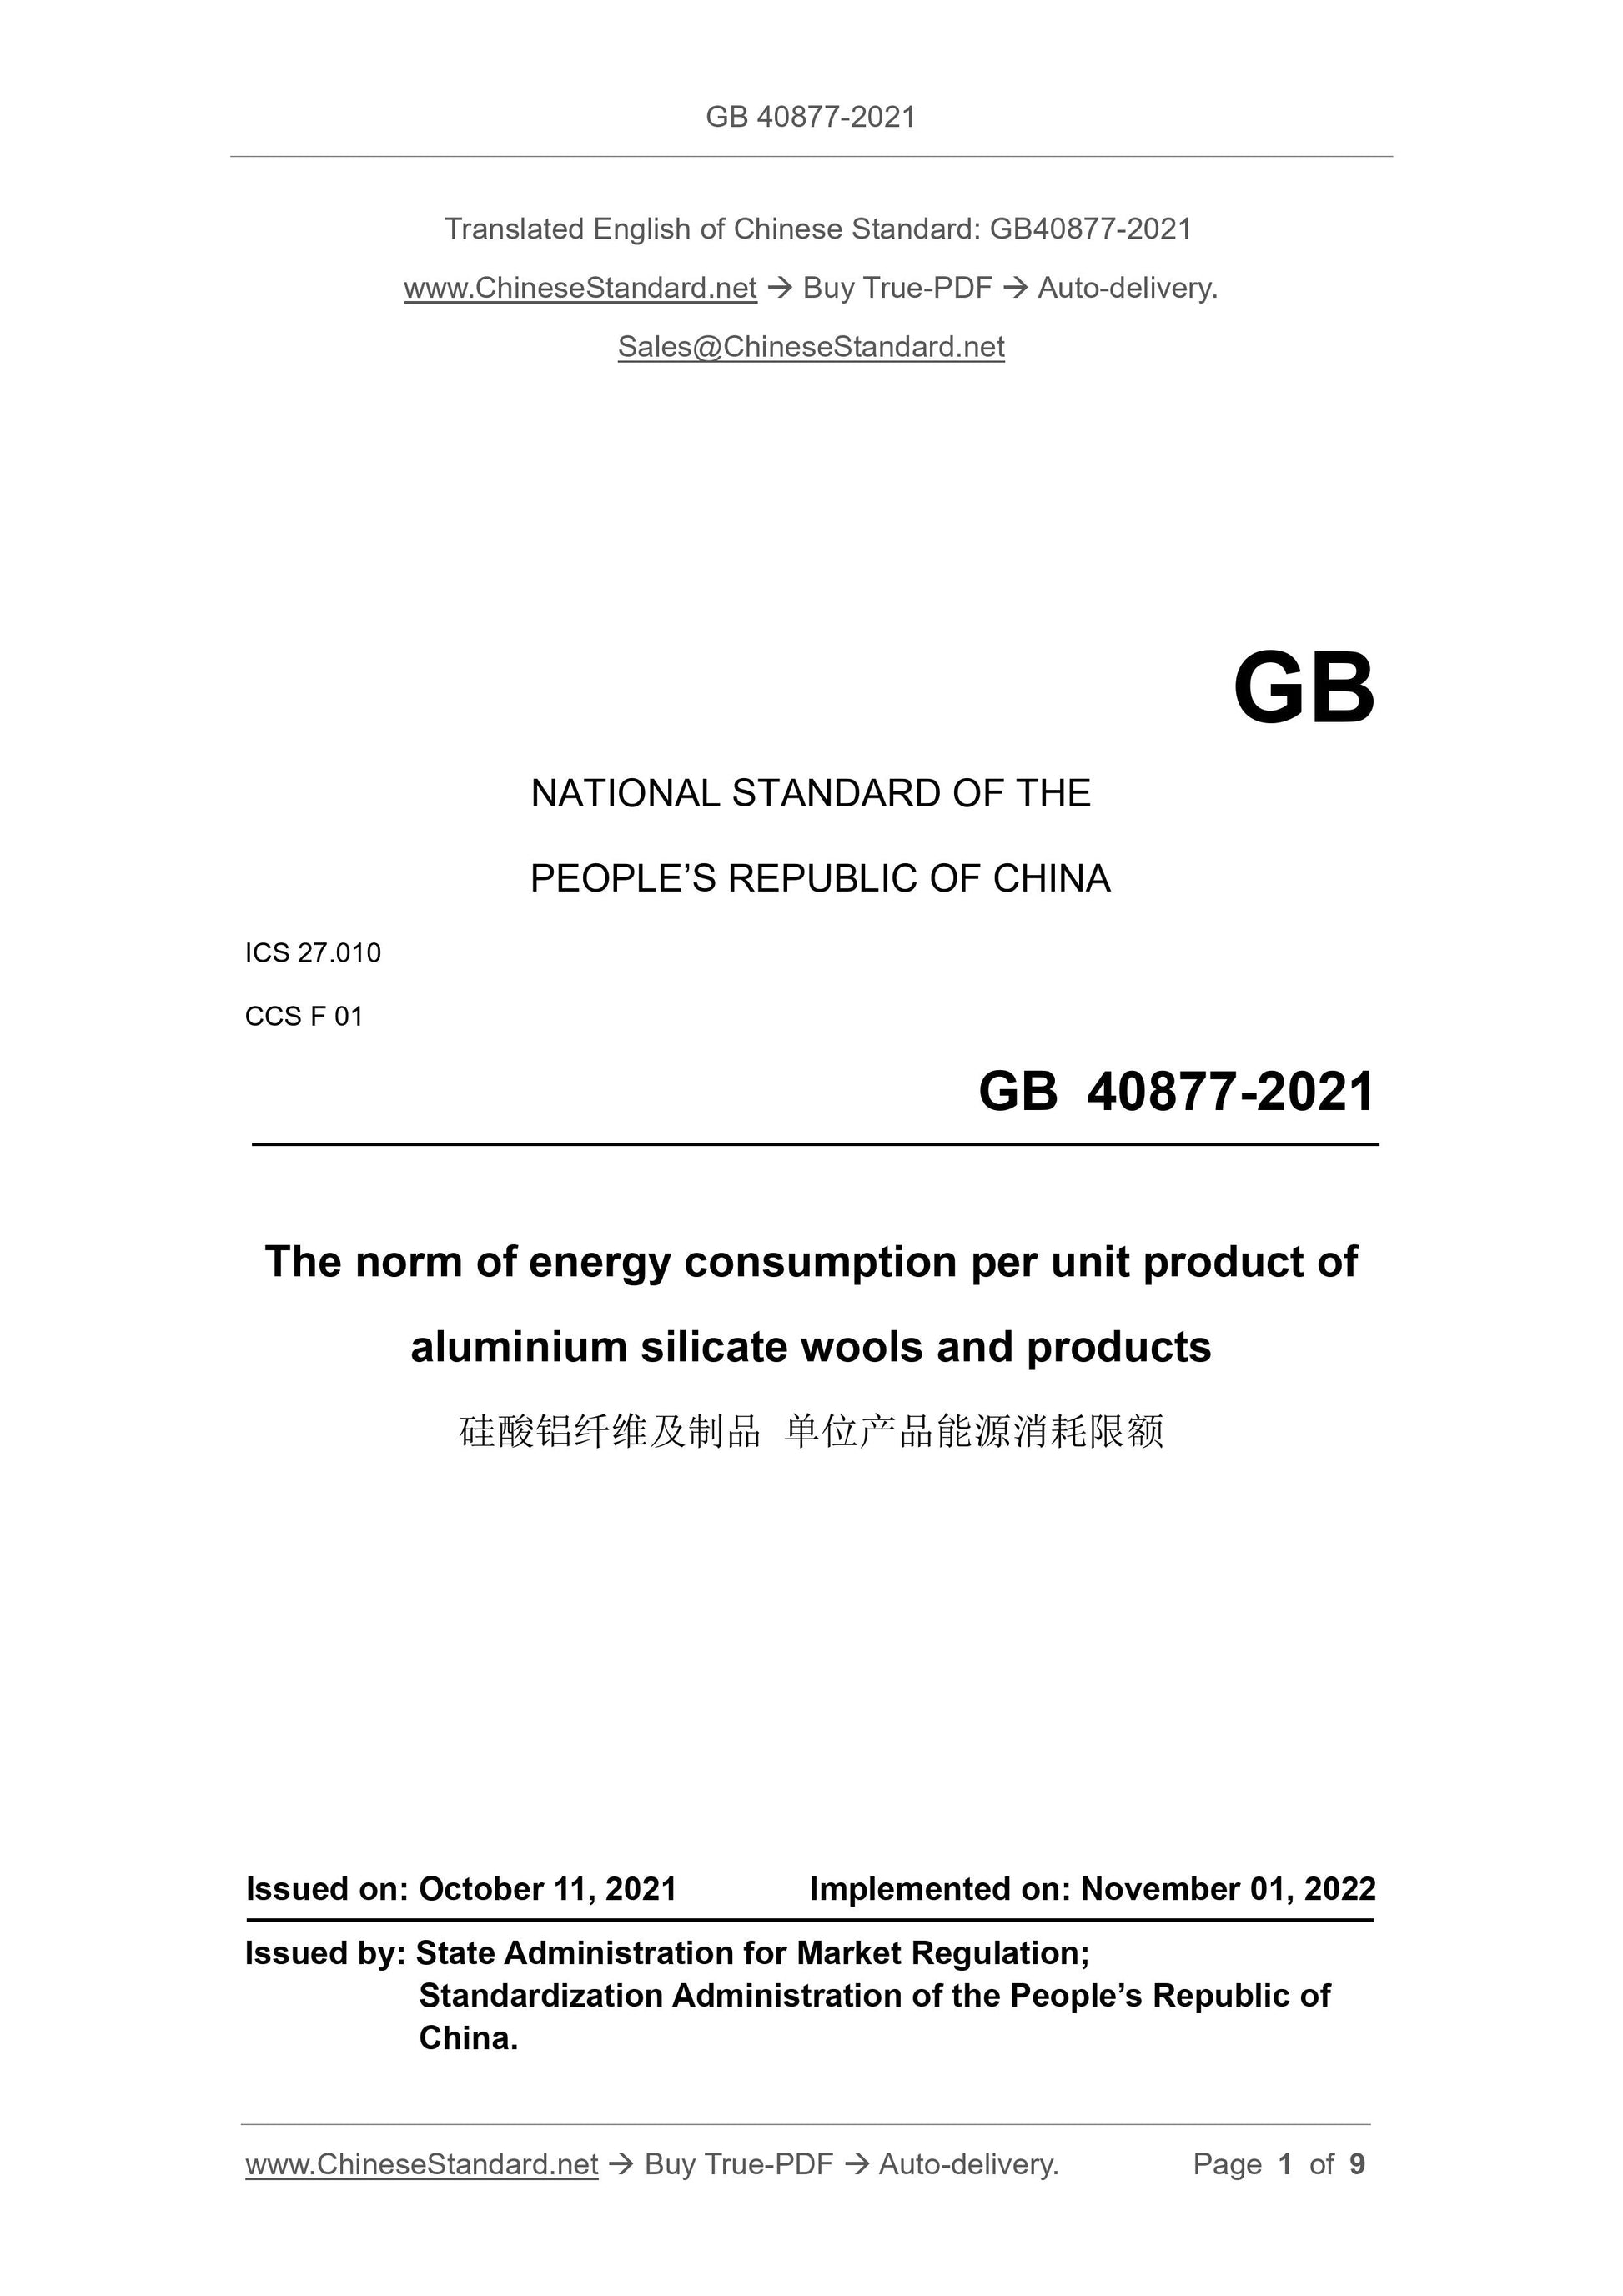 GB 40877-2021 Page 1